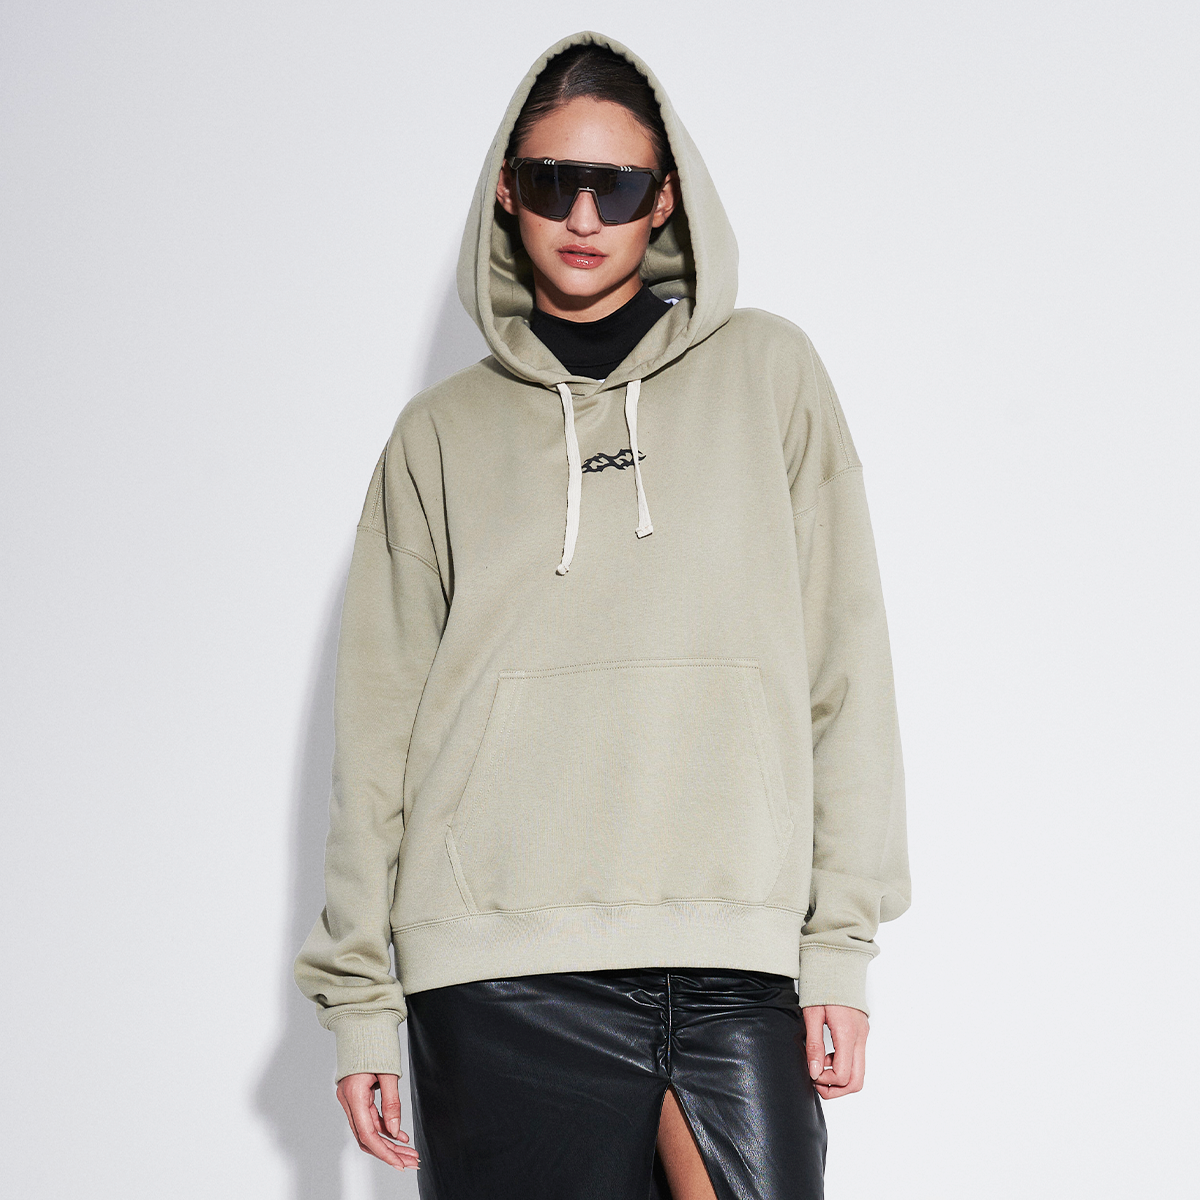 Hoodie Oversize Vision Hueso